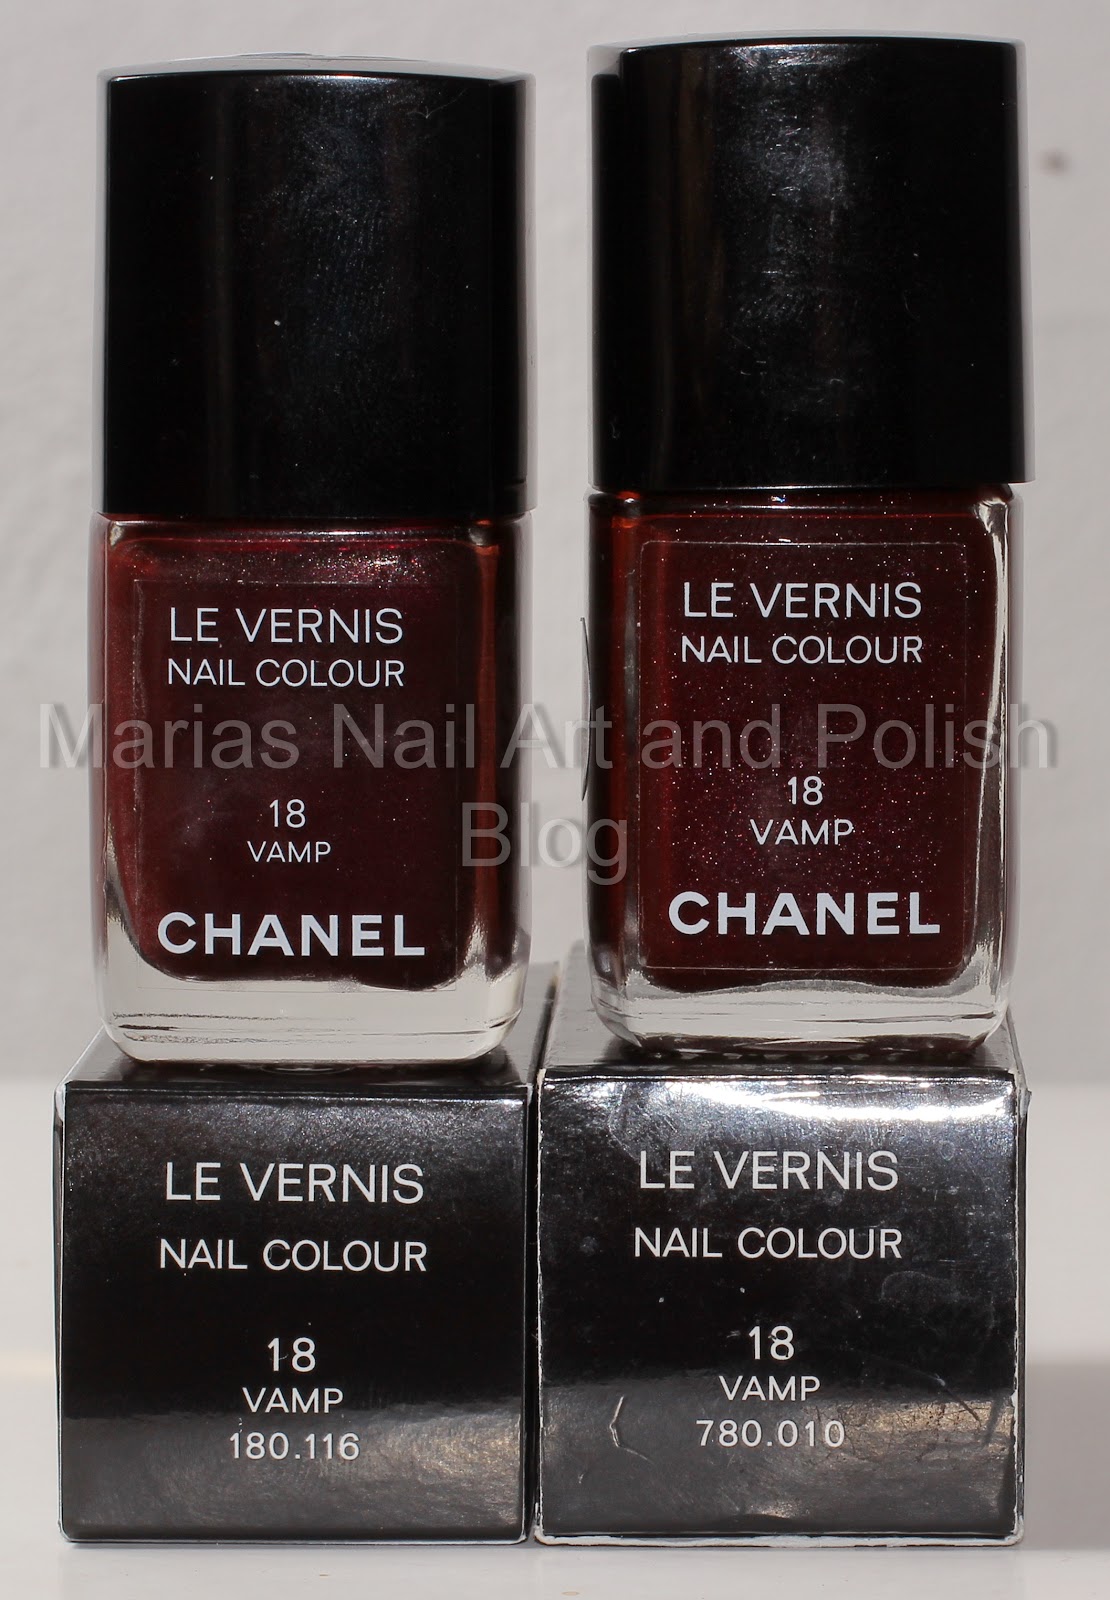 Marias Nail Art and Polish Blog: Chanel Rouge Noir 18 - Vamp 18, 5 x 18,  The Vamp Triology, comparisons and much more